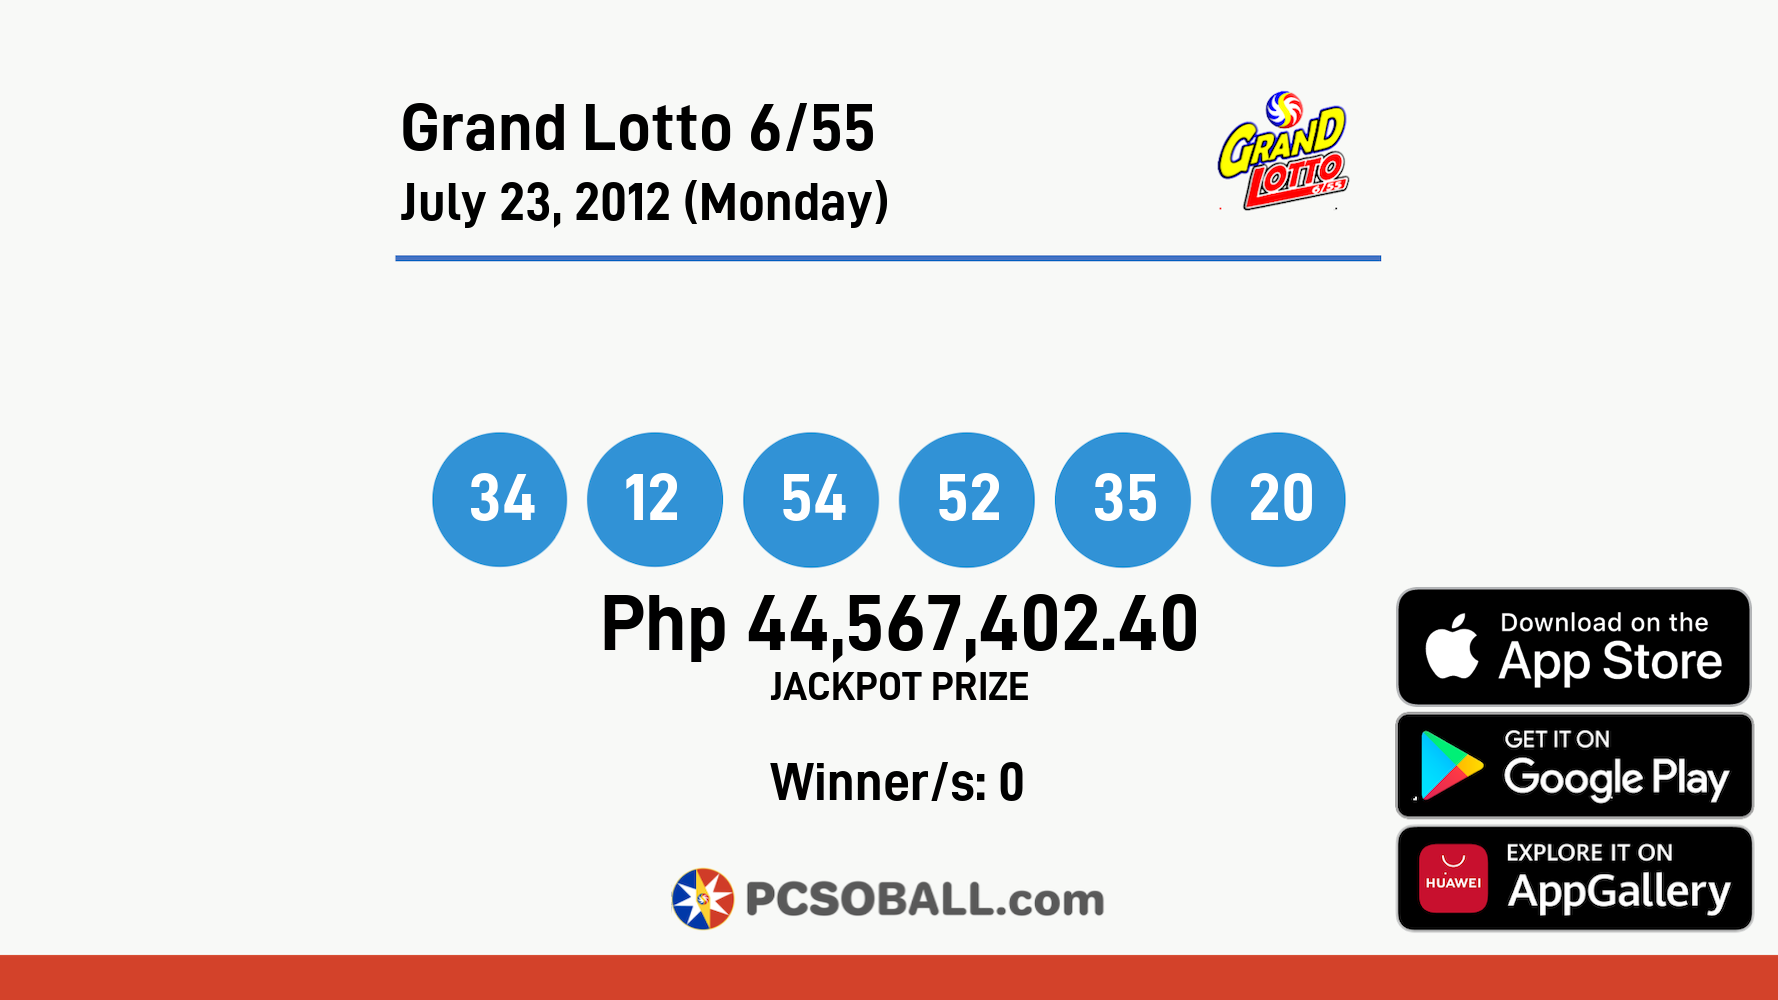 Grand Lotto 6/55 July 23, 2012 (Monday) Result